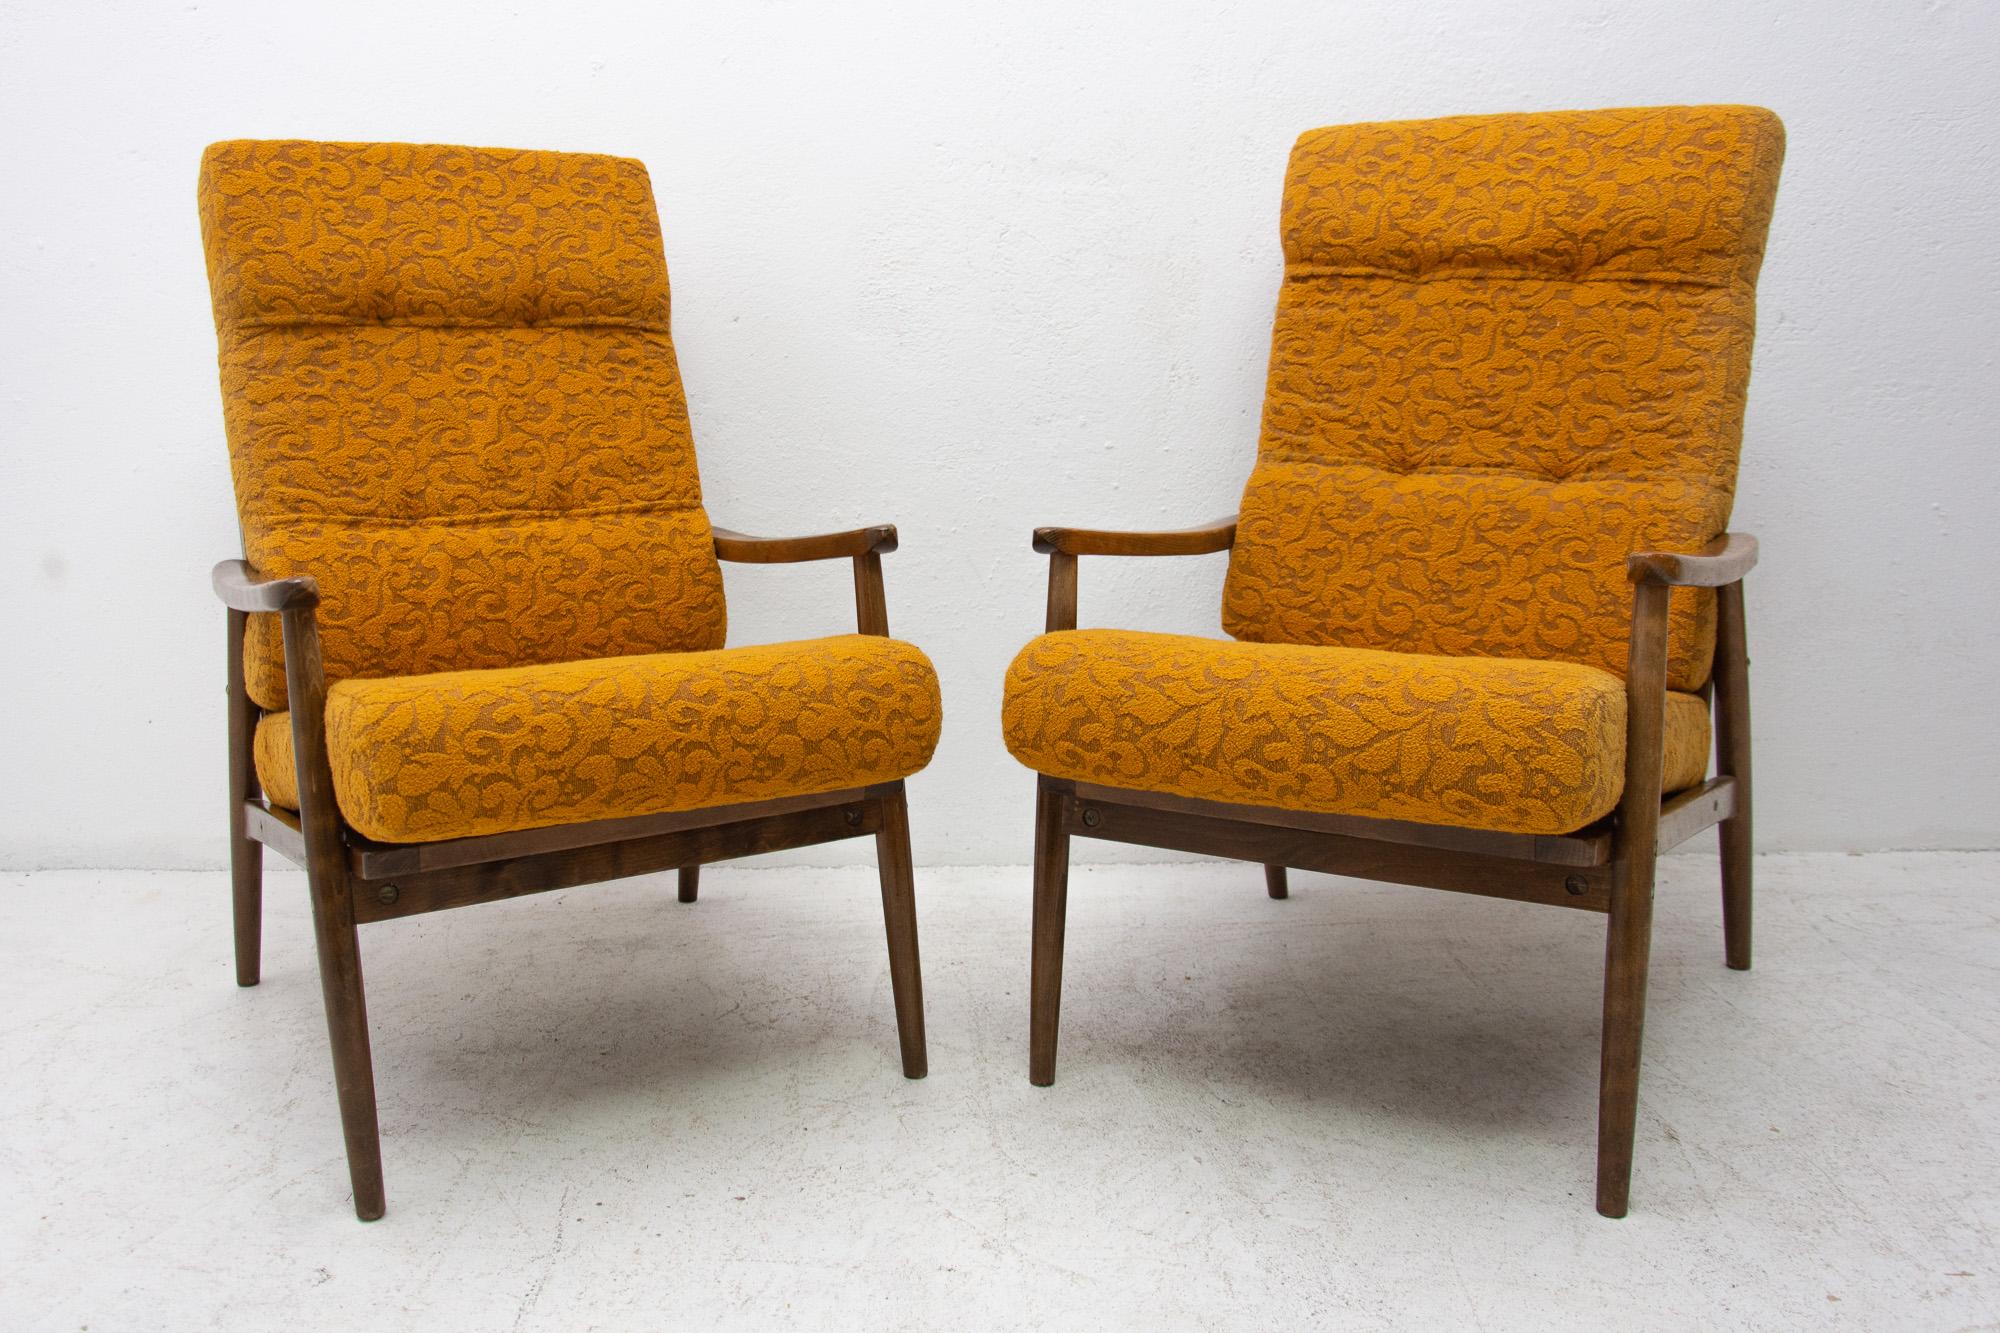 A pair of midcentury armchairs, made in the former Czechoslovakia in the 1960s. The chairs were produced probably by TON Bystrice pod Hostýnem company (Thonet successor in Czechoslovakia) The structure is made of beech wood and the chairs has